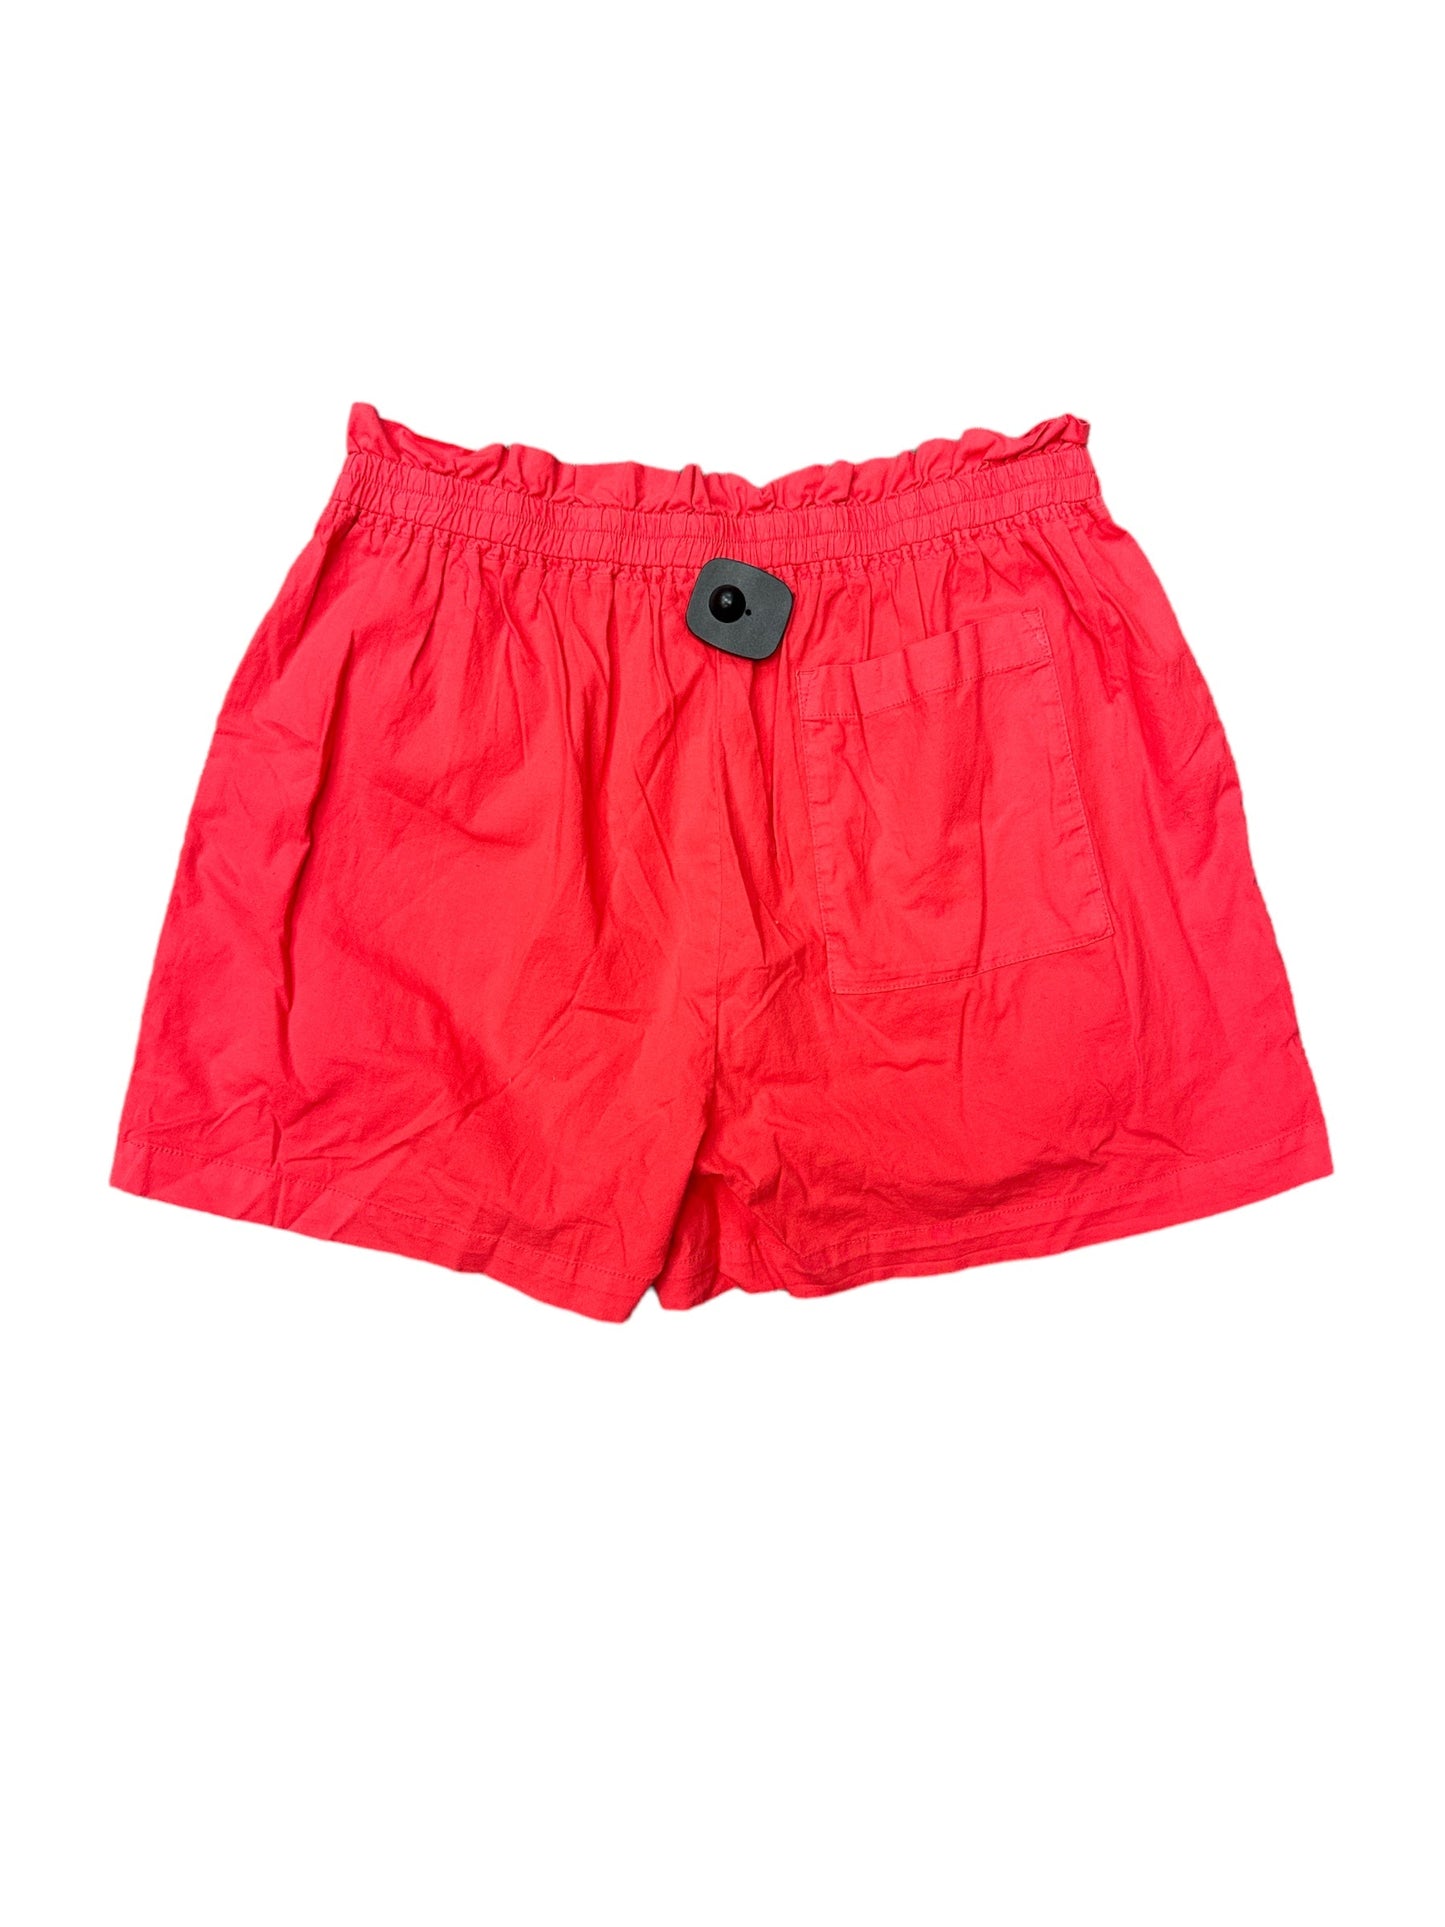 Shorts By Cmb  Size: 10